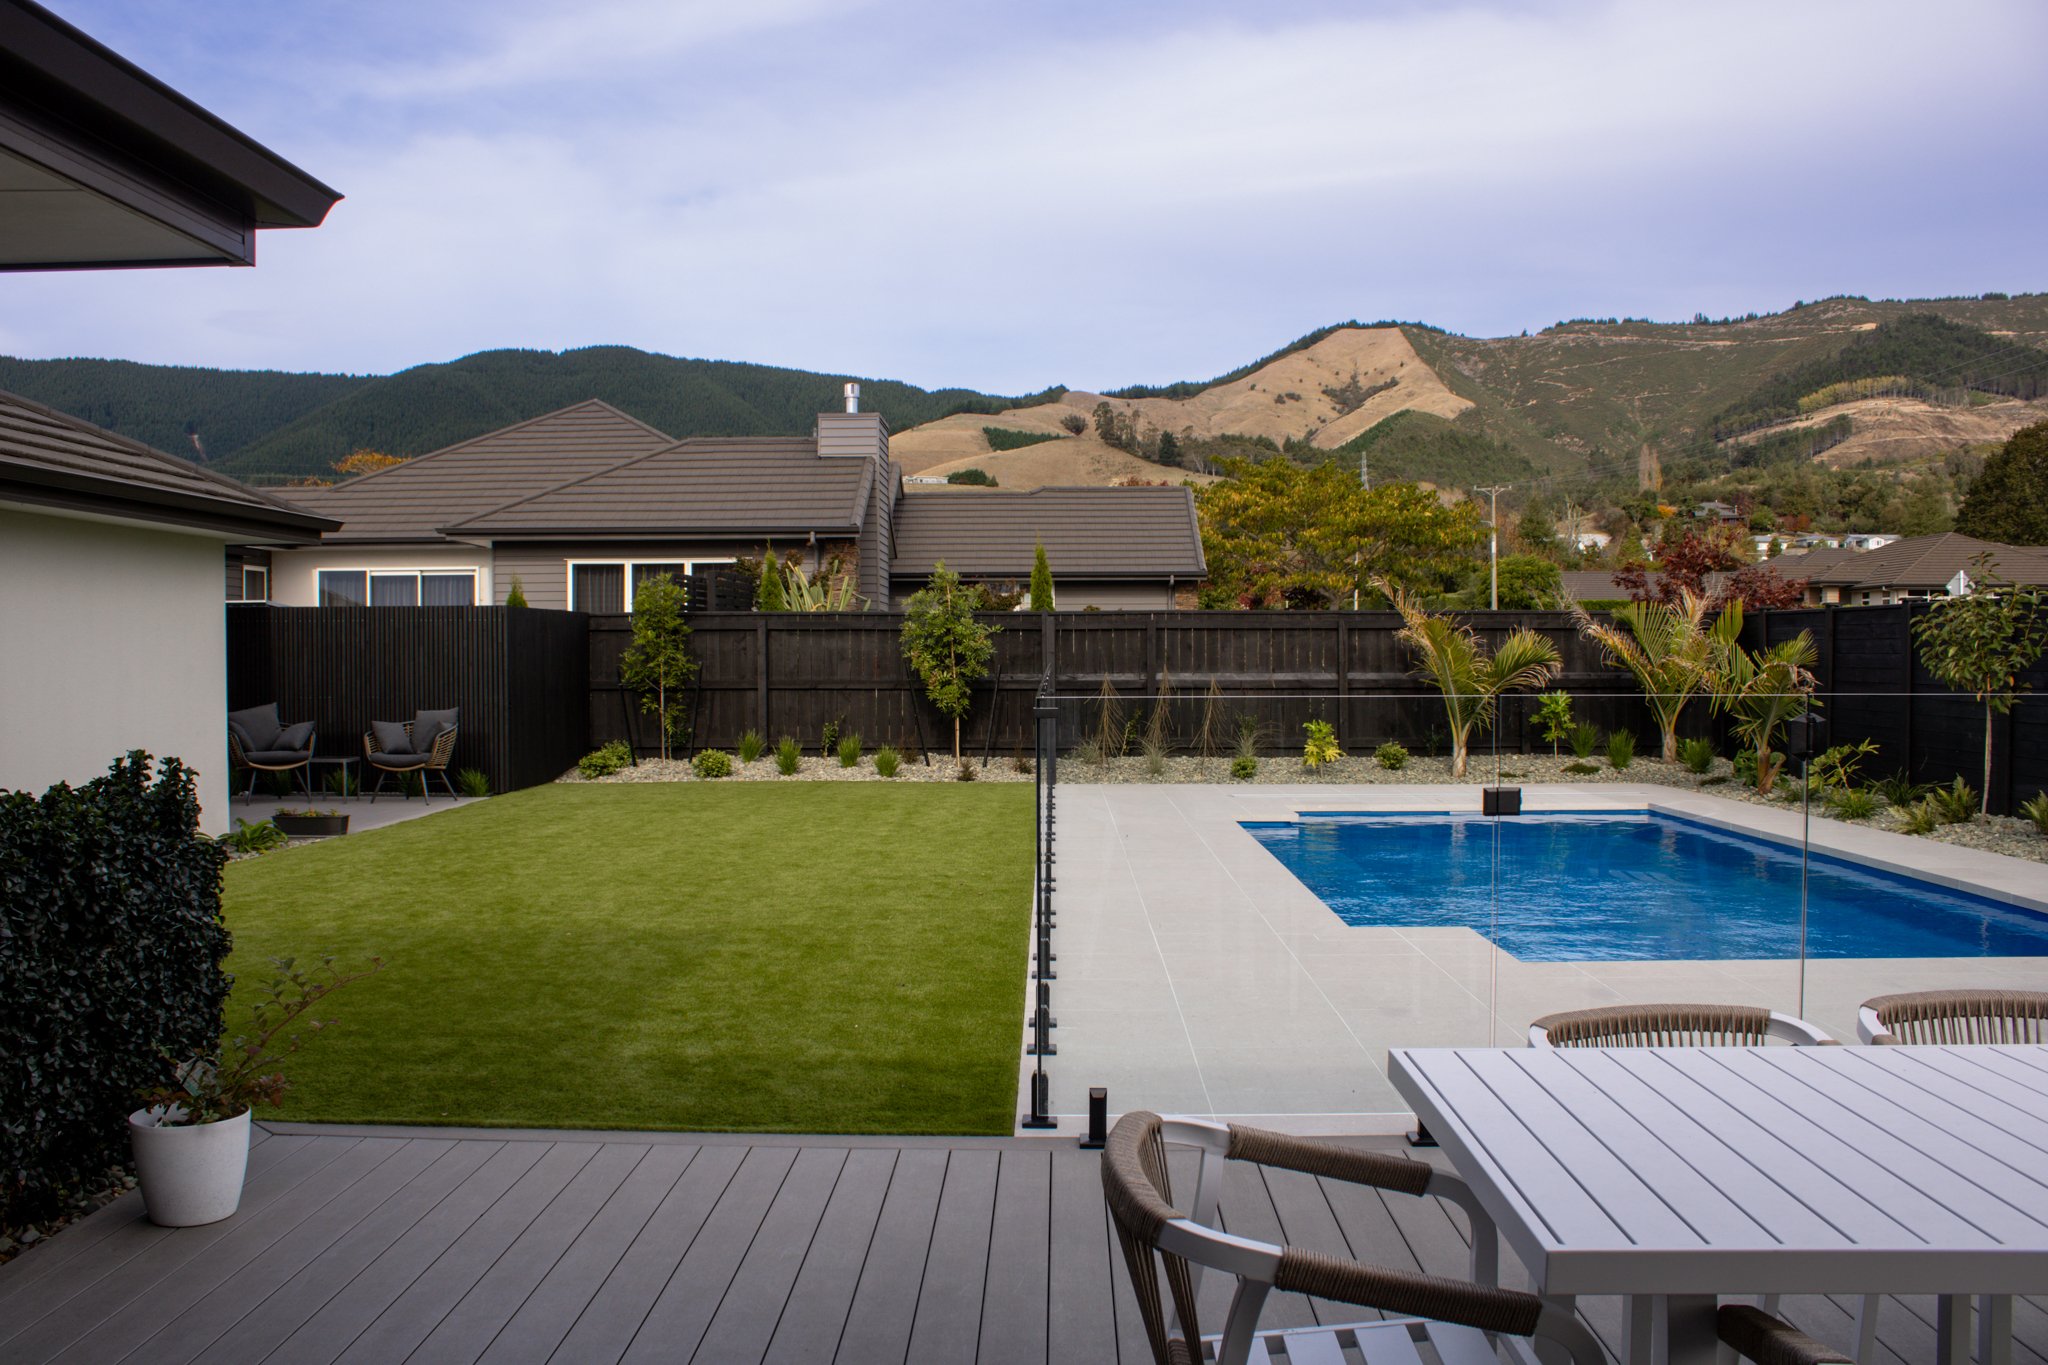 NV Design allowed for a seamless transition between this pool area and the surrounding landscaping with straight lines and glass fencing. Beautiful! 🤩

@guardianfencingnz